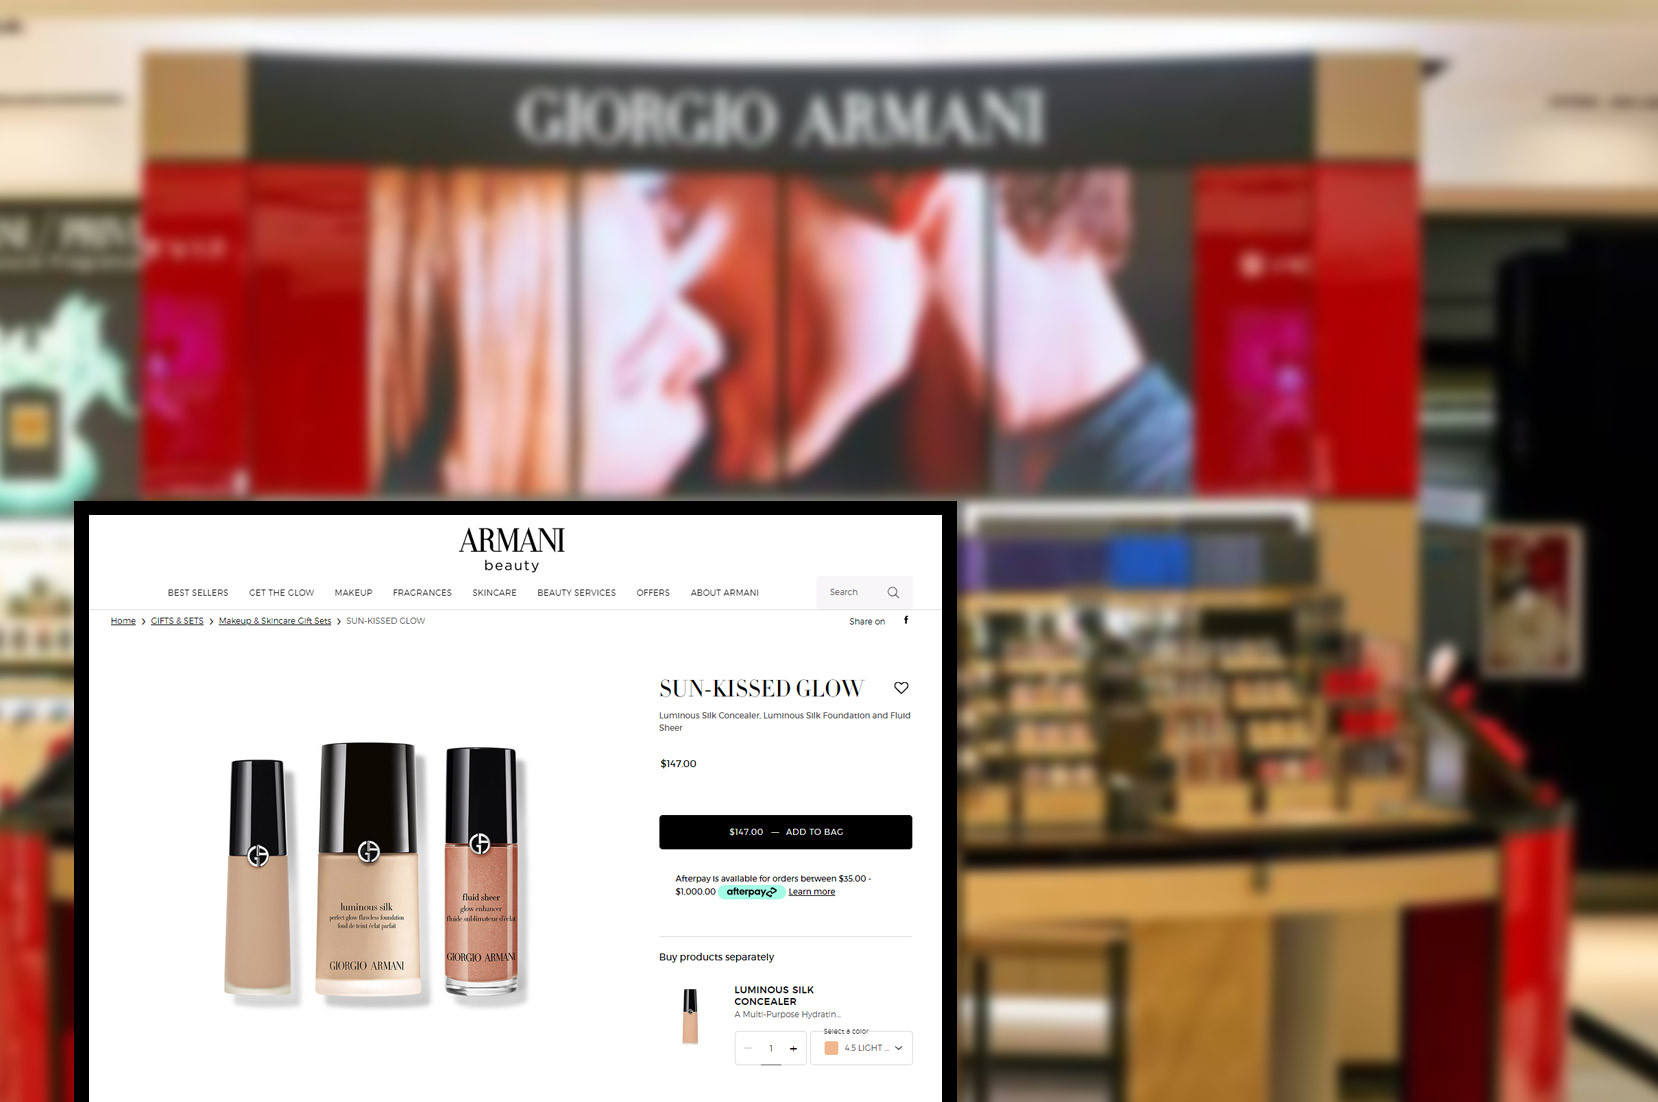 giorgioarmanibeauty-comproduct-pricing-information-and-image-scraping-services